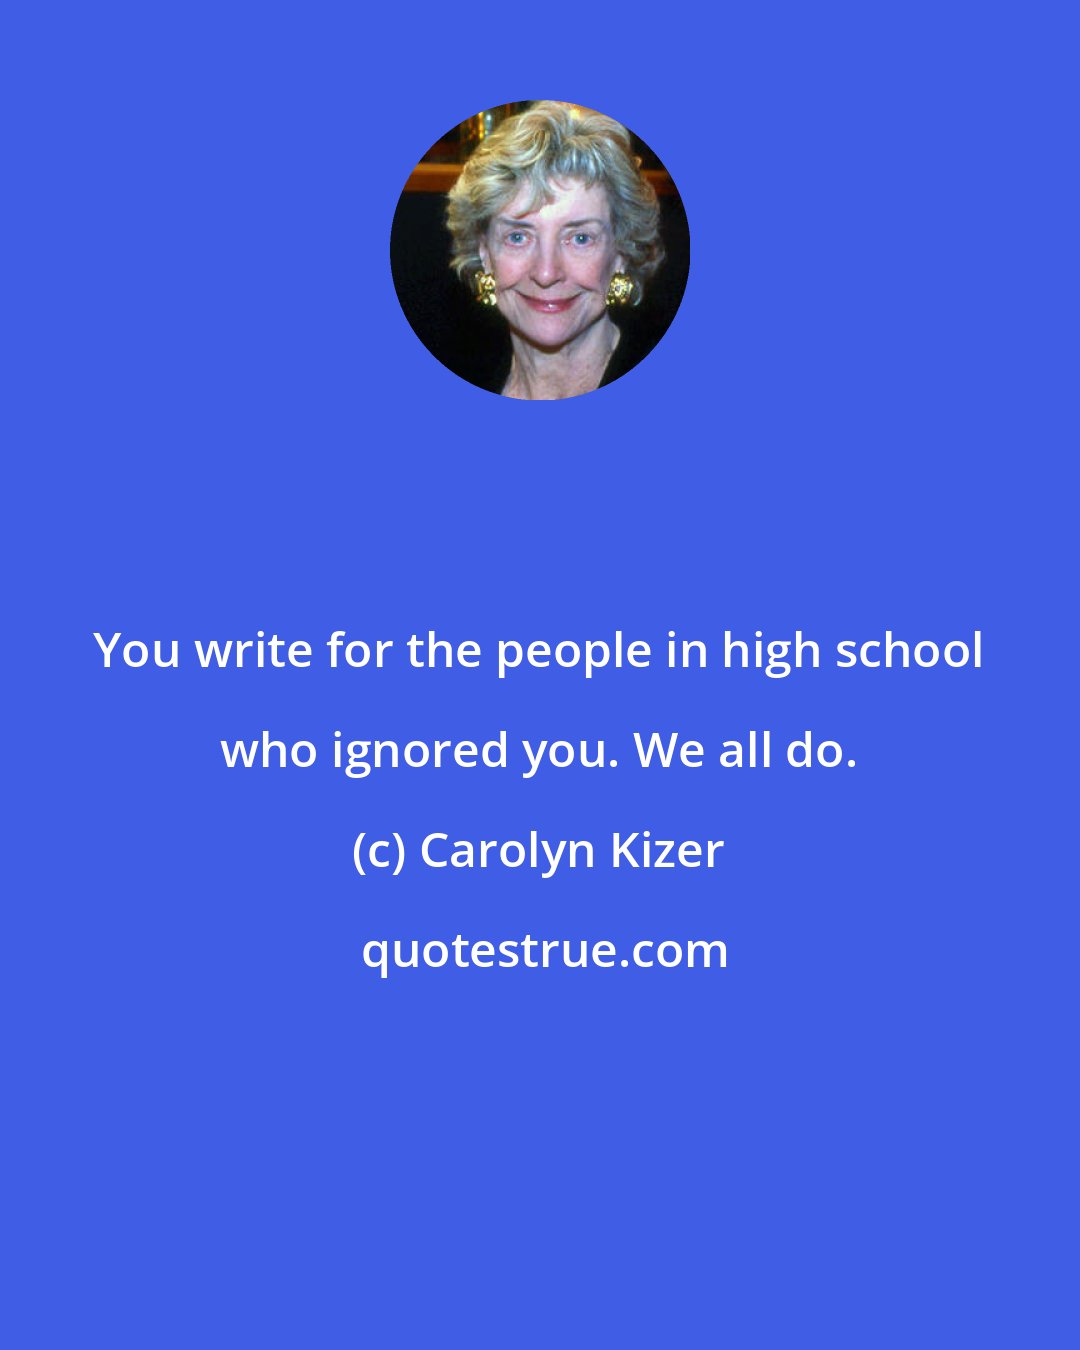 Carolyn Kizer: You write for the people in high school who ignored you. We all do.